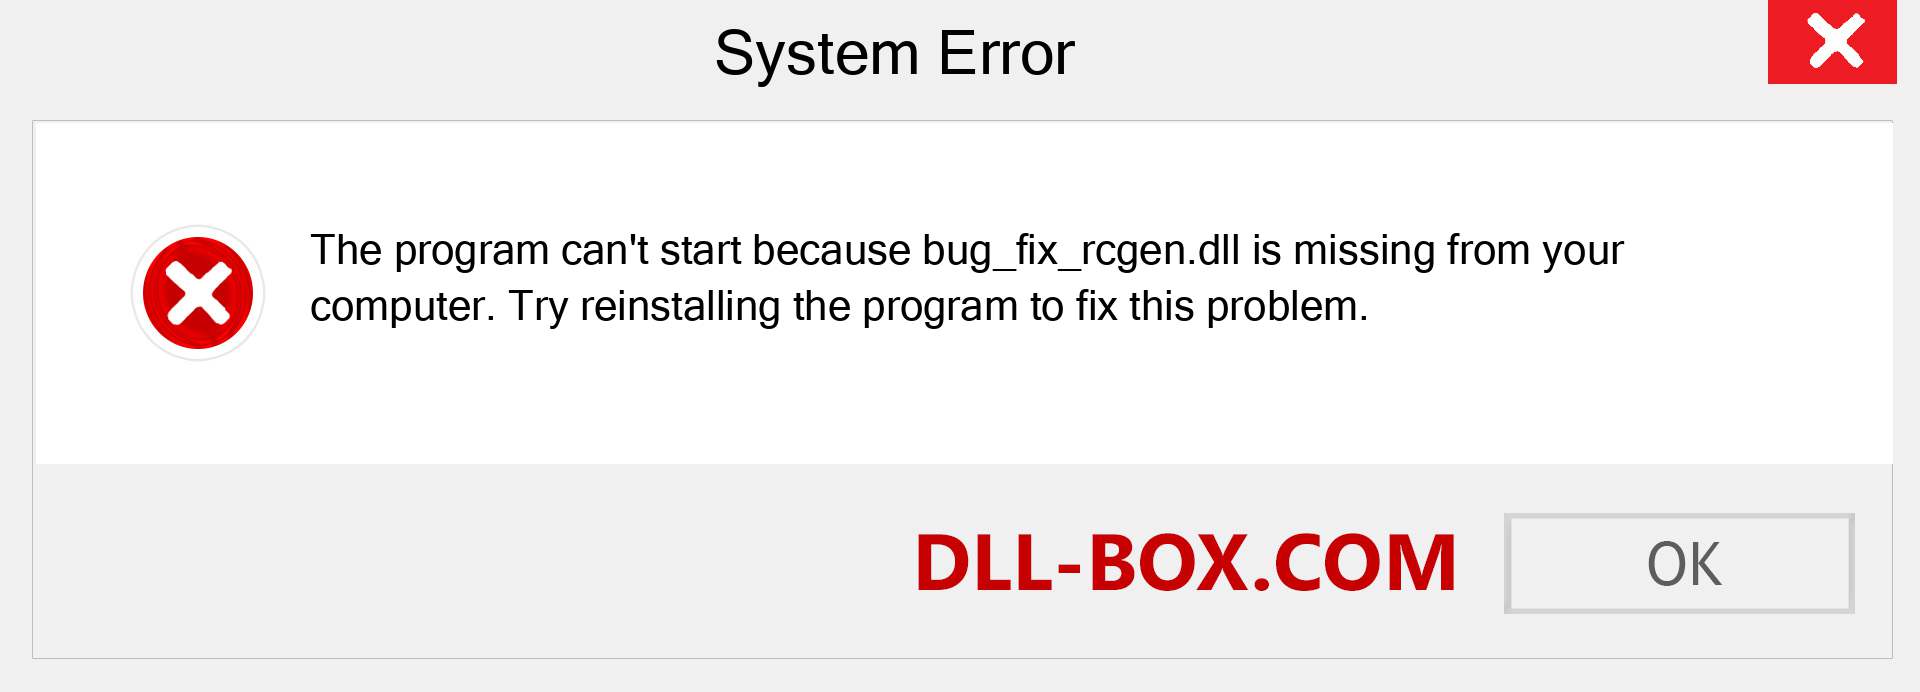  bug_fix_rcgen.dll file is missing?. Download for Windows 7, 8, 10 - Fix  bug_fix_rcgen dll Missing Error on Windows, photos, images